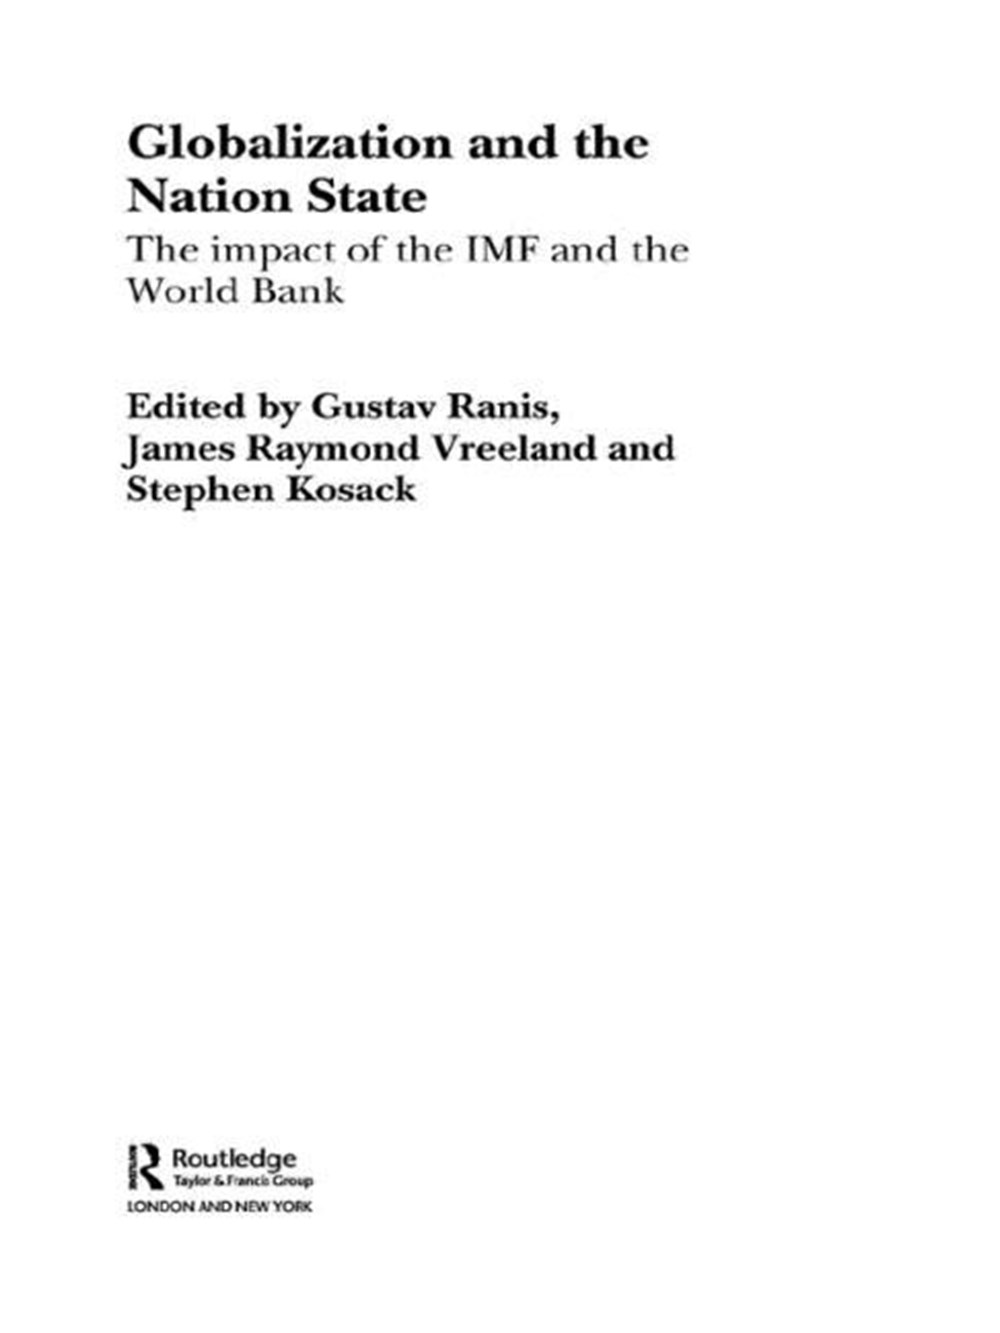 Globalization and the Nation State The Impact of the IMF and the World Bank